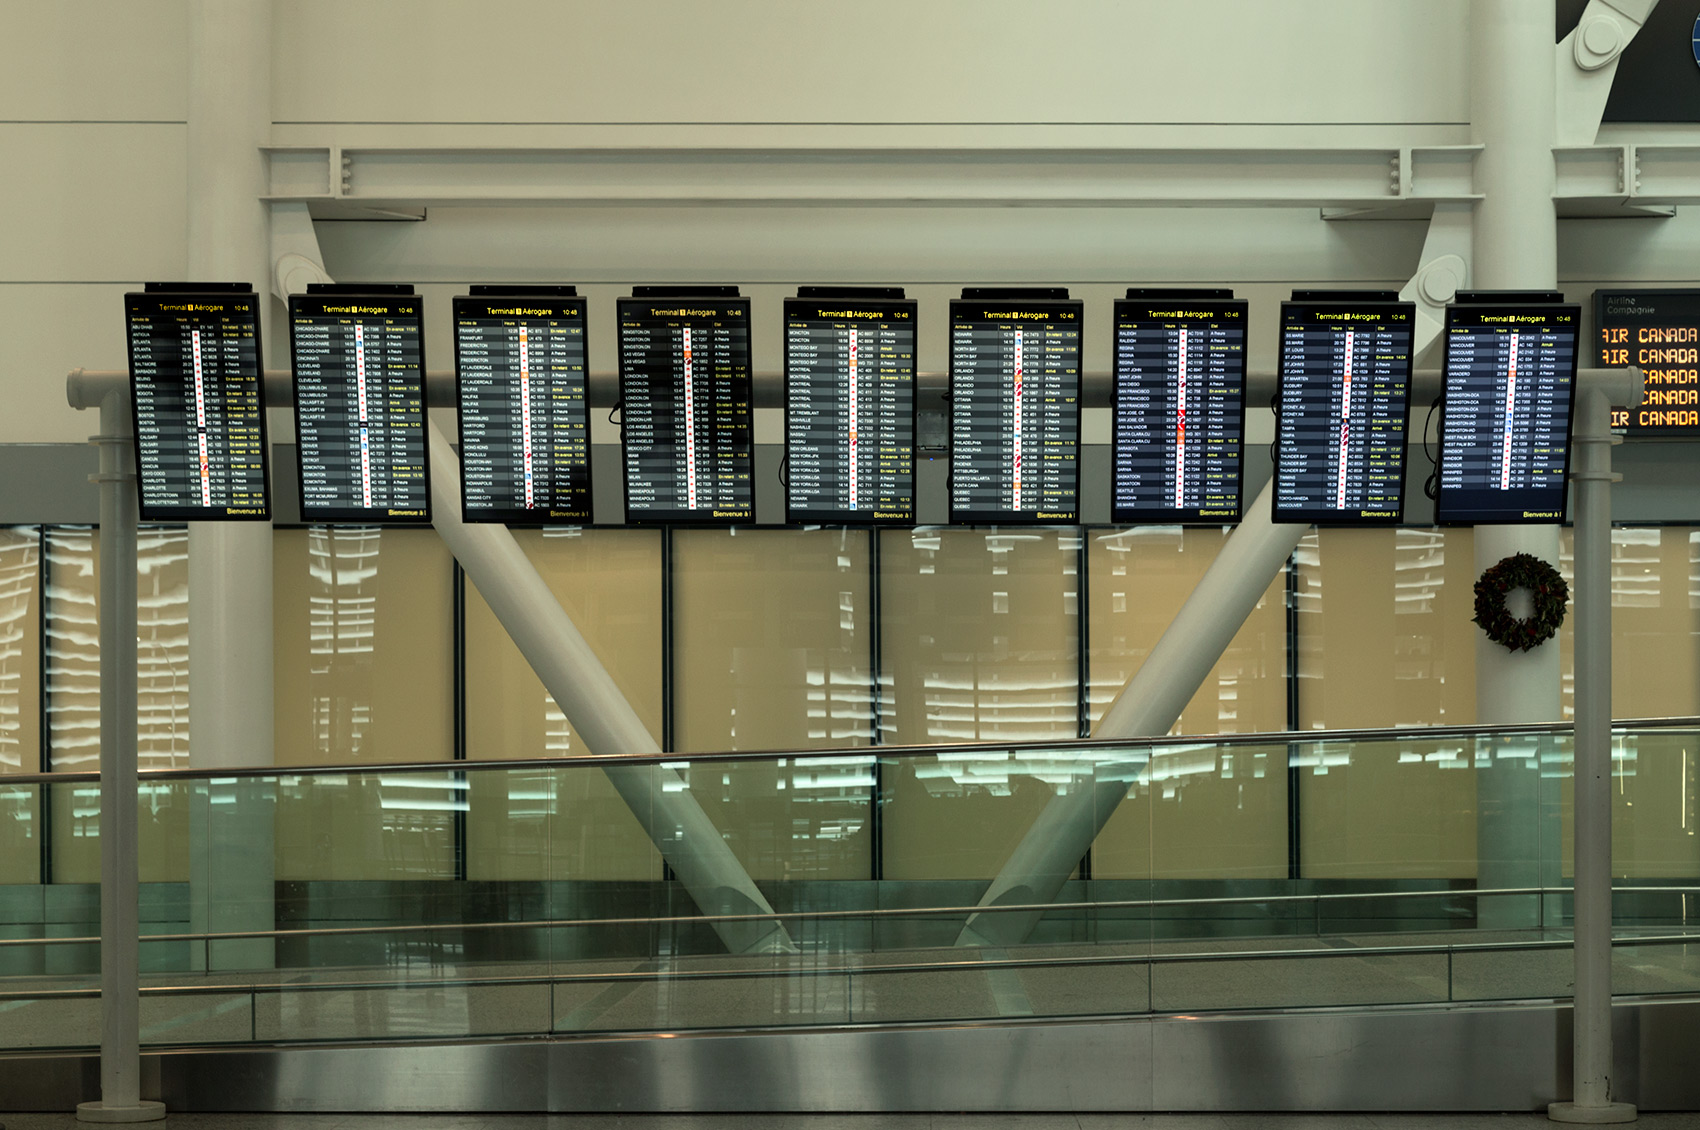 20150108. An seemingly suspended set of screens shows flight arr